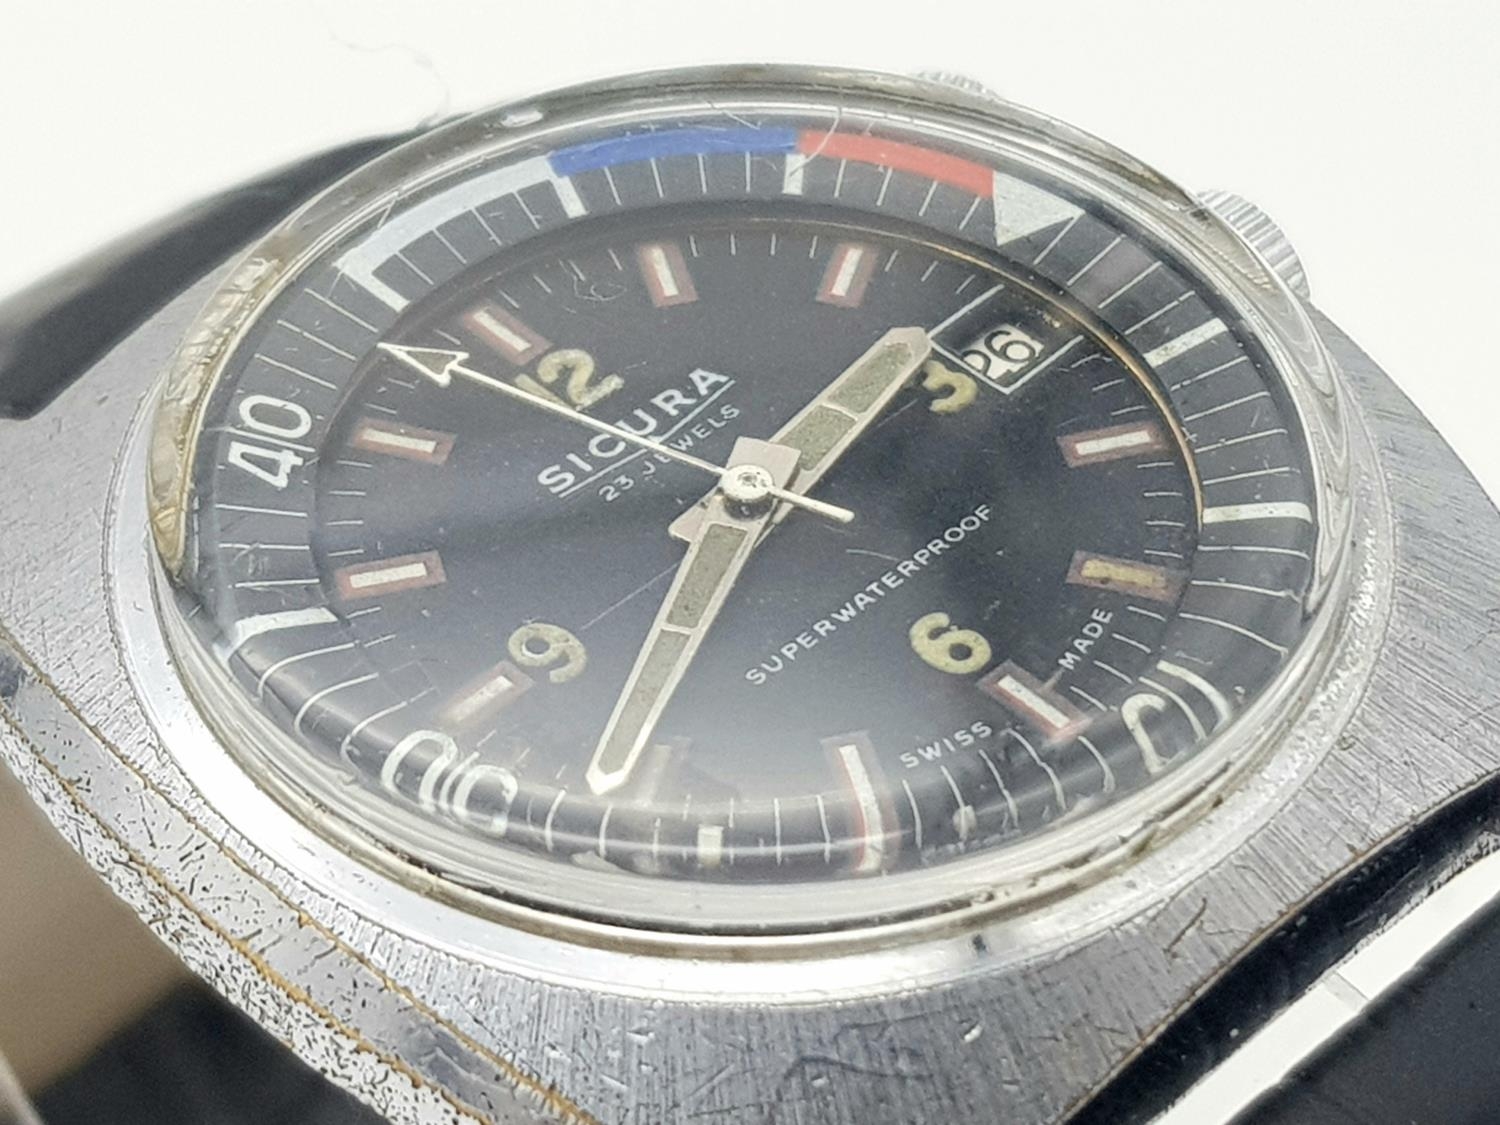 A Vintage Secura 23 Jewels Mechanical Gents Watch. Black leather strap. Stainless steel case - 38mm. - Bild 3 aus 5